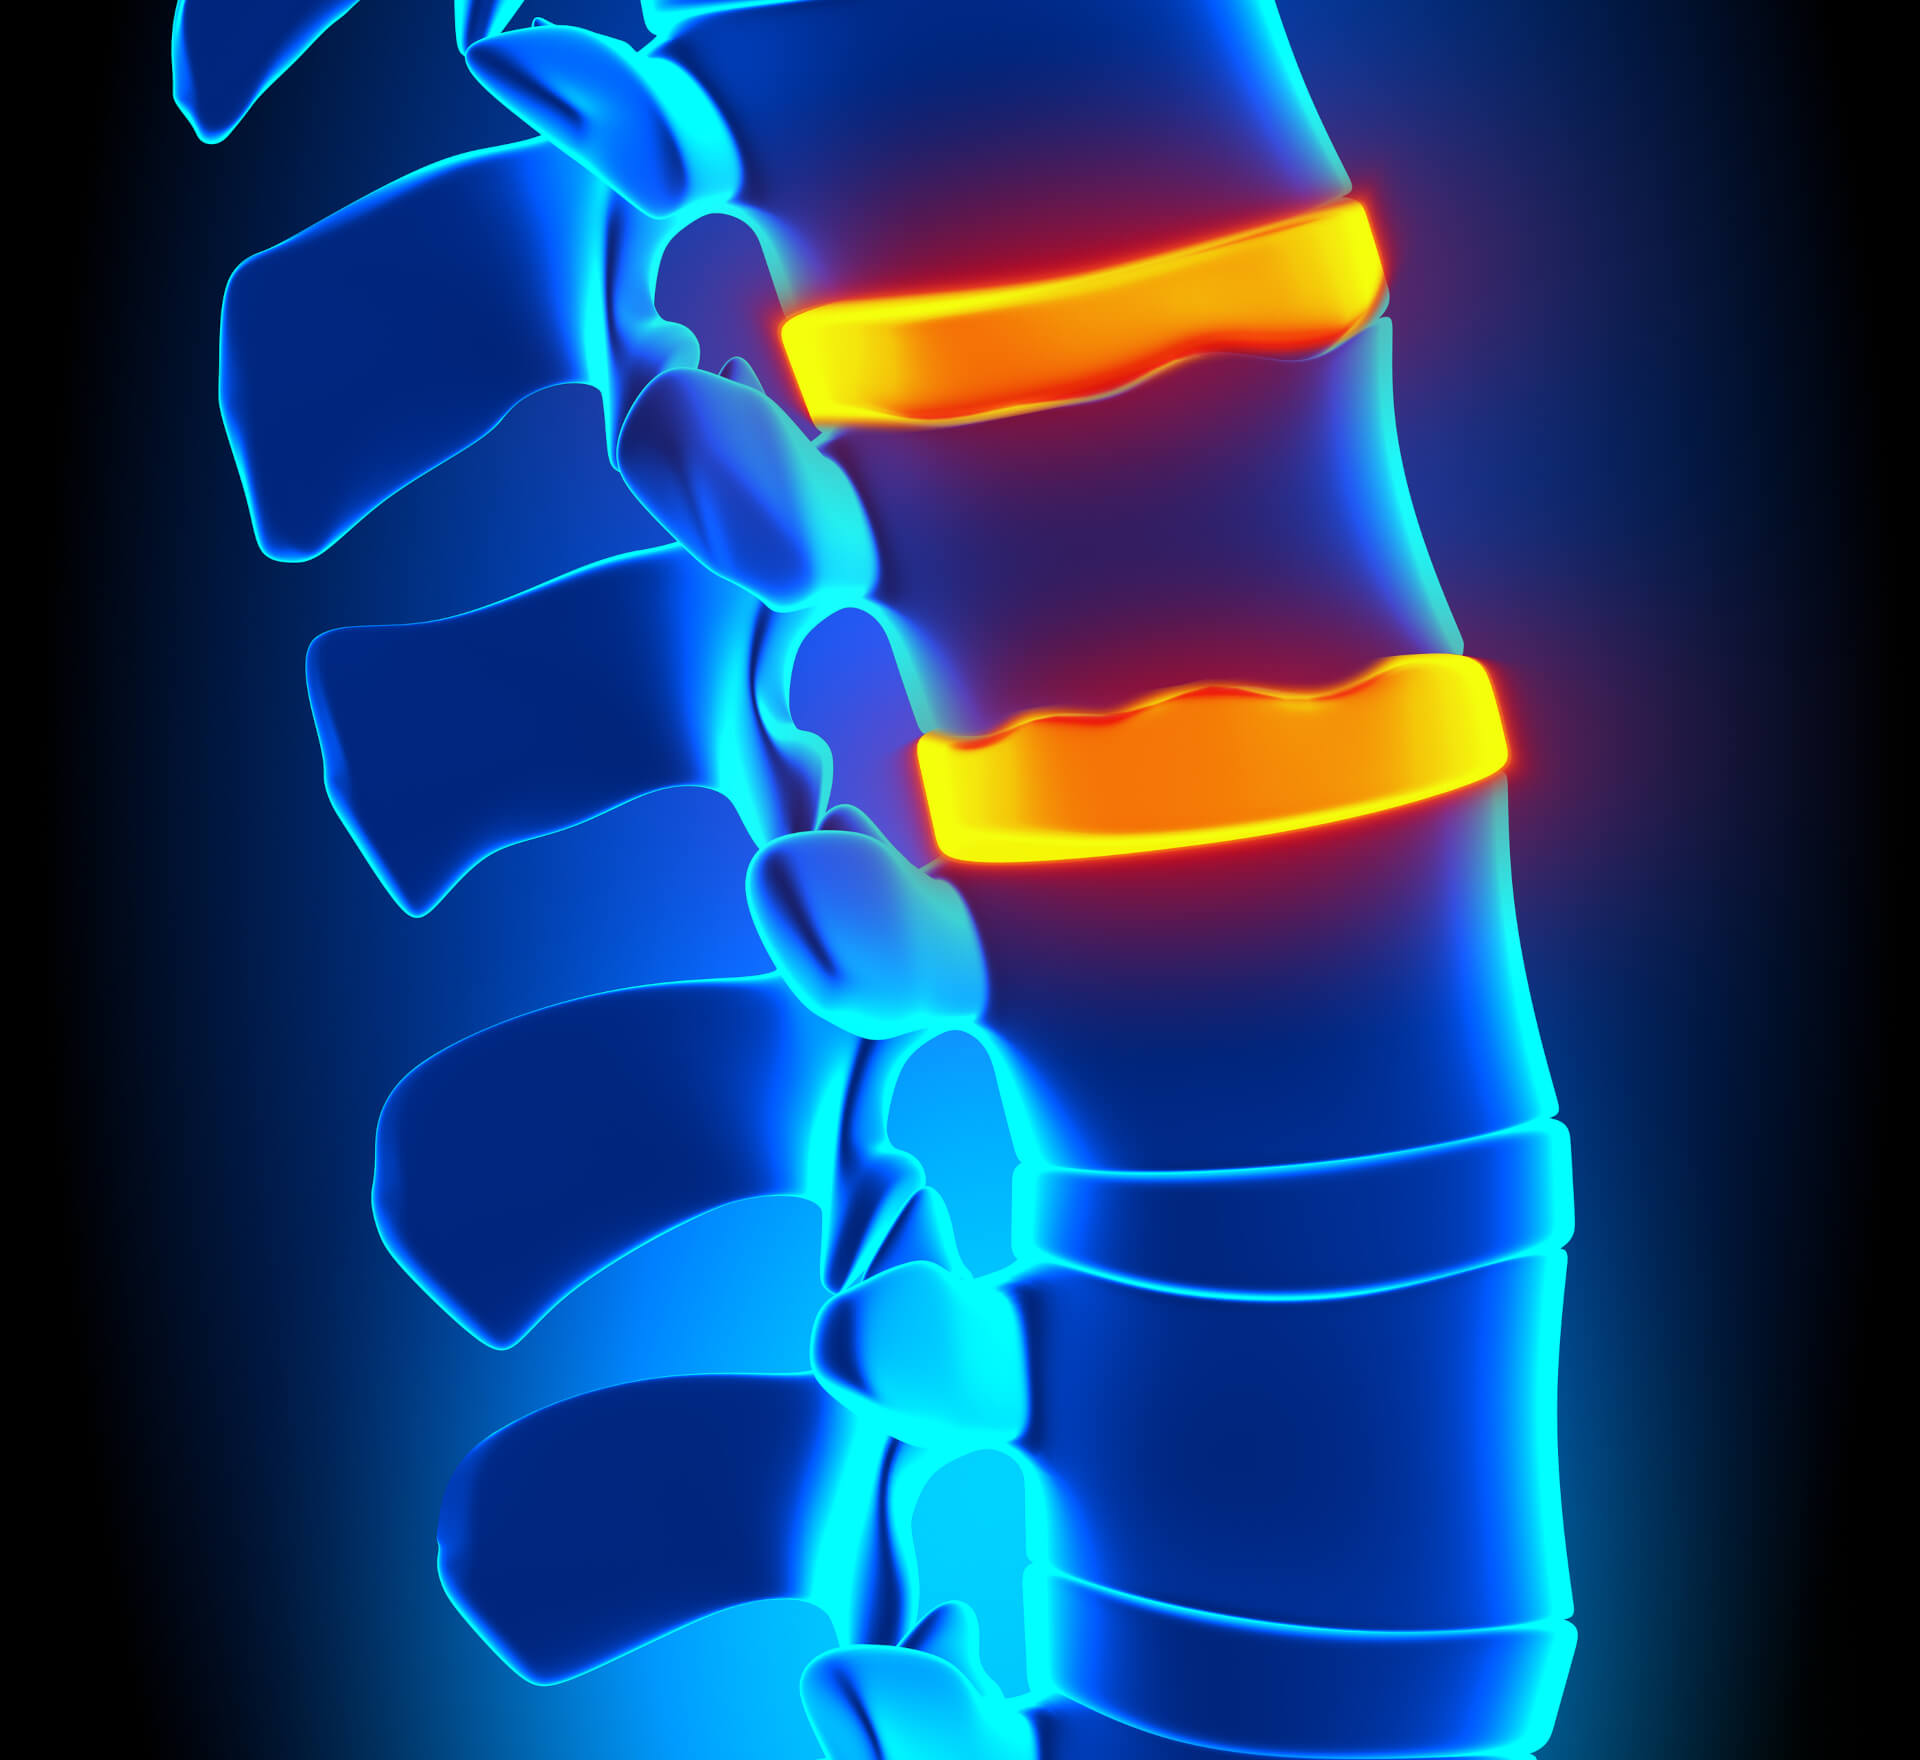 What is the difference between a slipped disc, bulging disc, herniated disc and a ruptured disc?